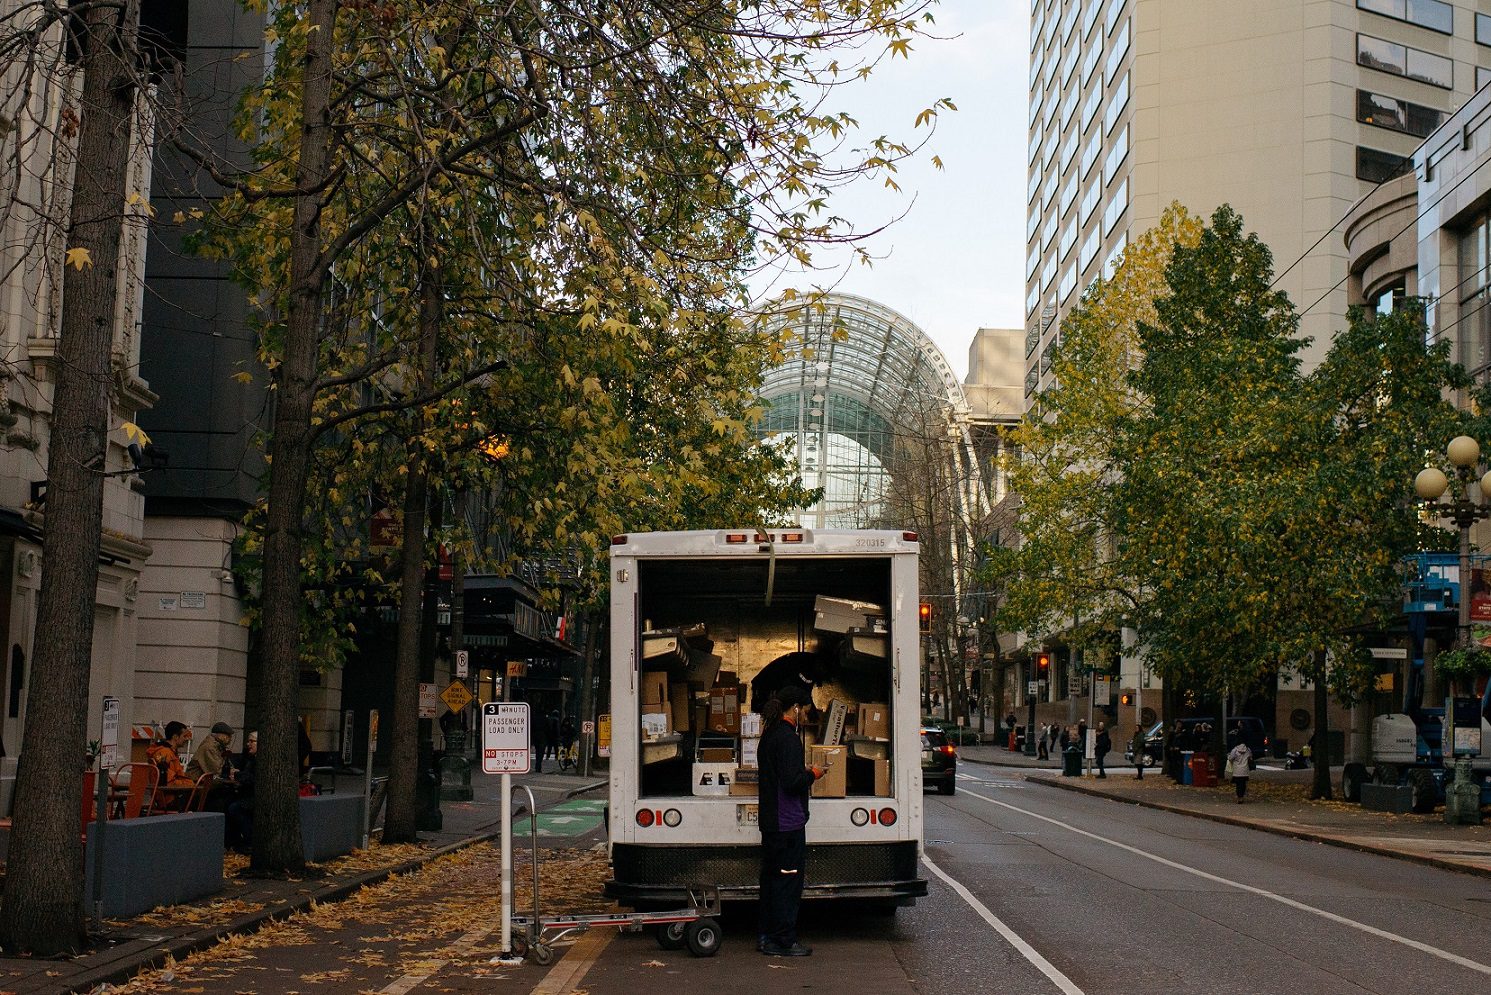 A delivery worker prepares to unload goods while parked at the curbside. Large trees and buildings are in the background, as well as a white load zone sign.